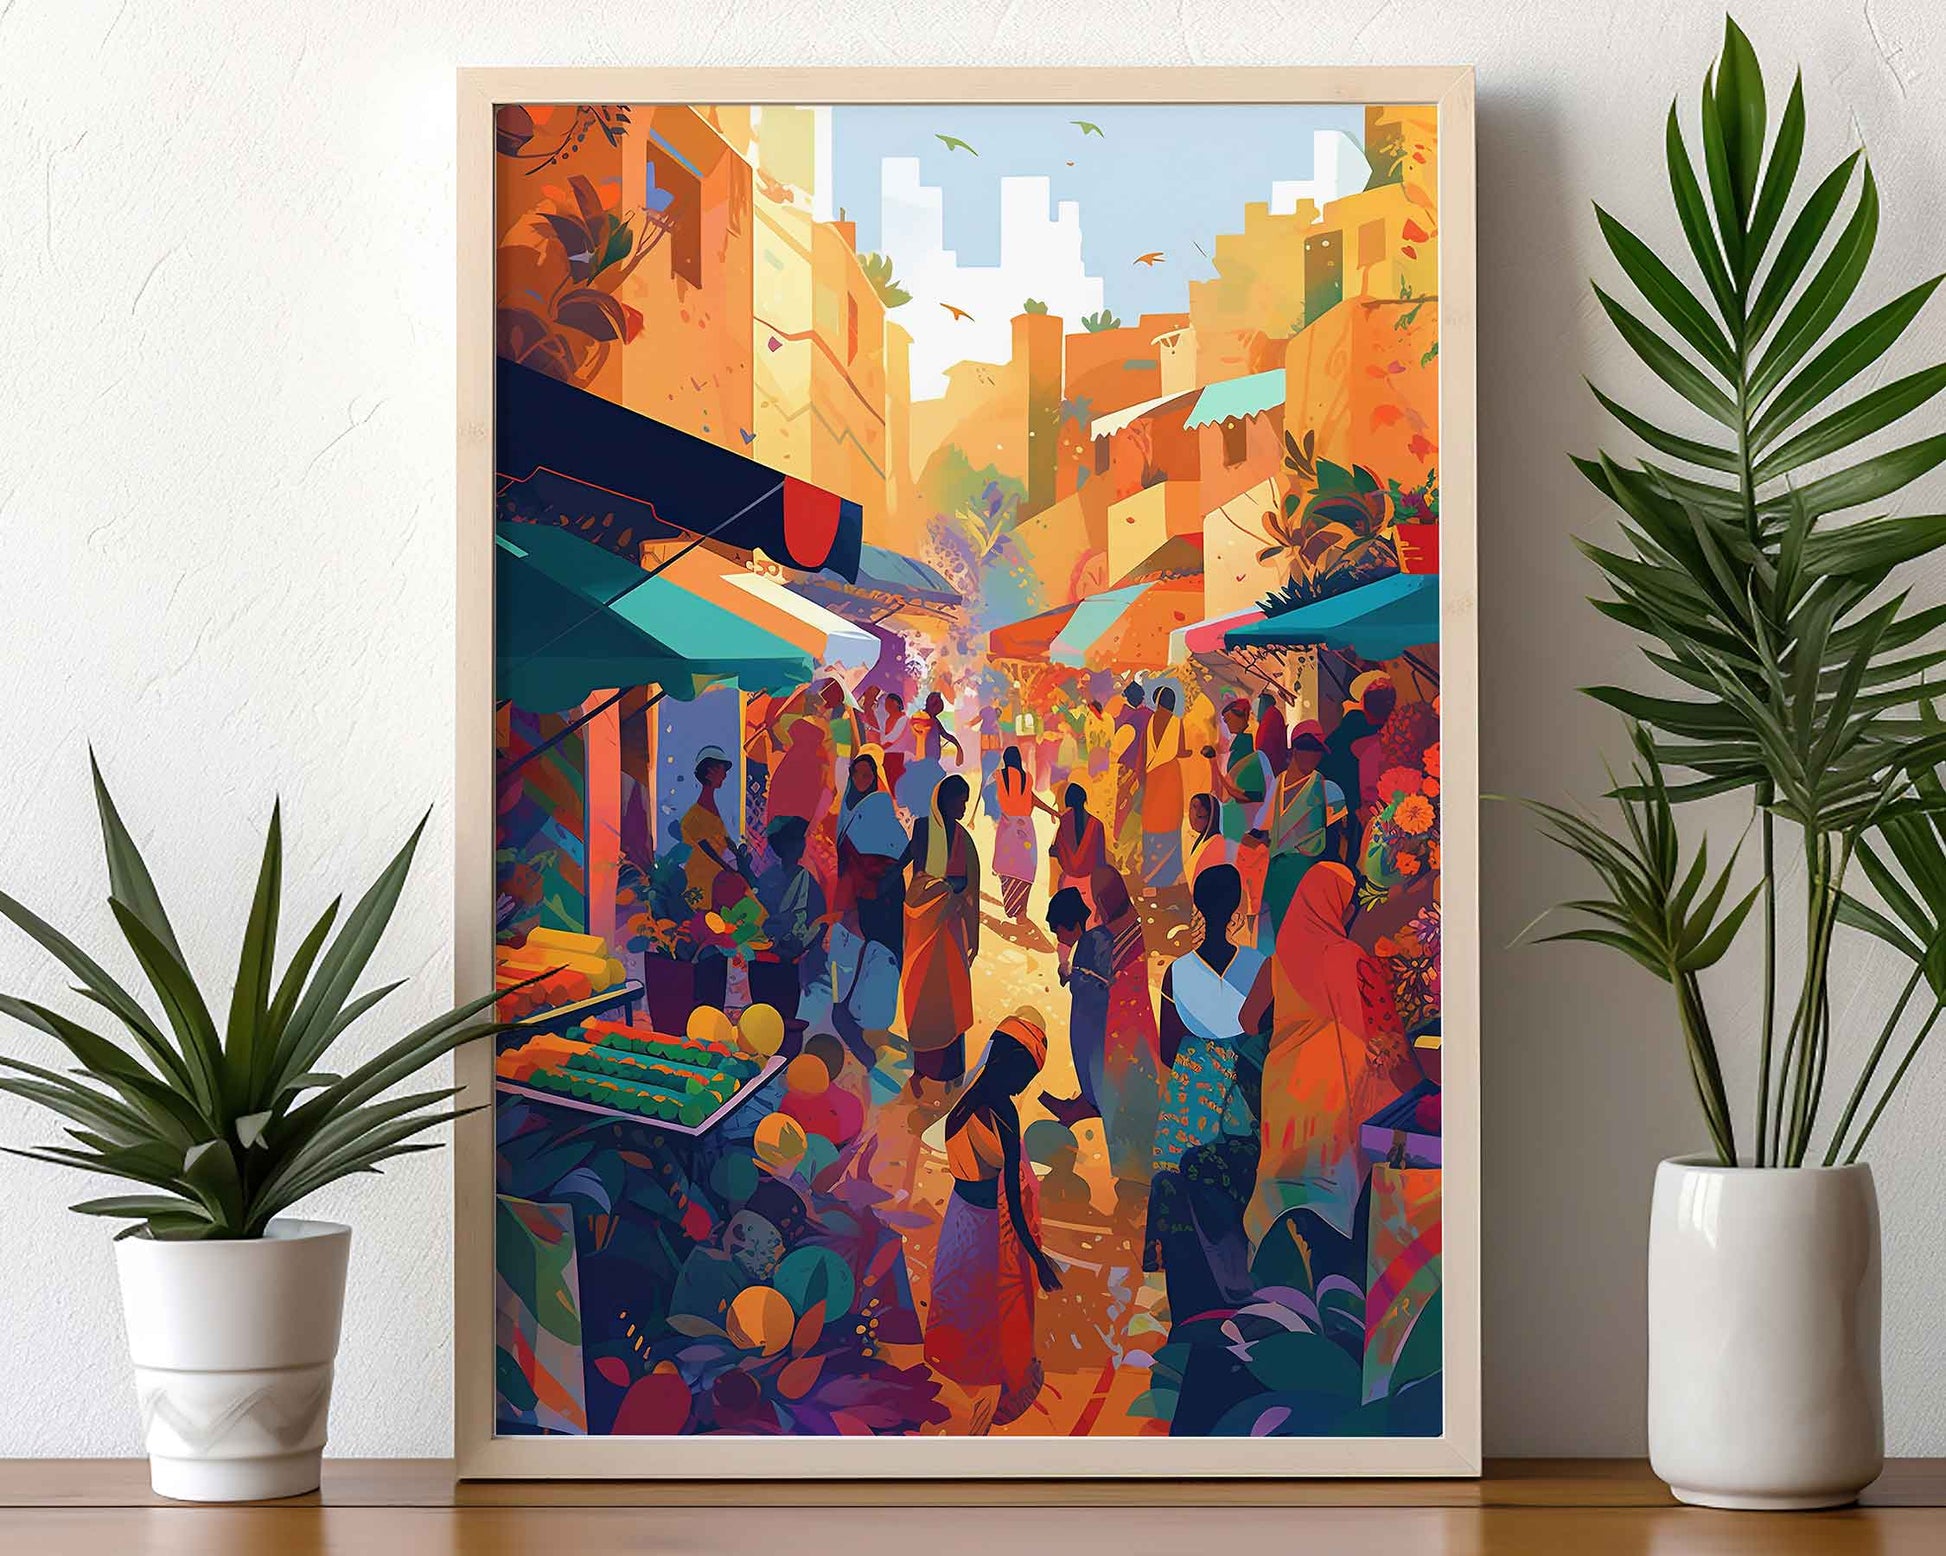 Framed Image of Moroccan Street Markets Colourful Abstract African Wall Art Prints